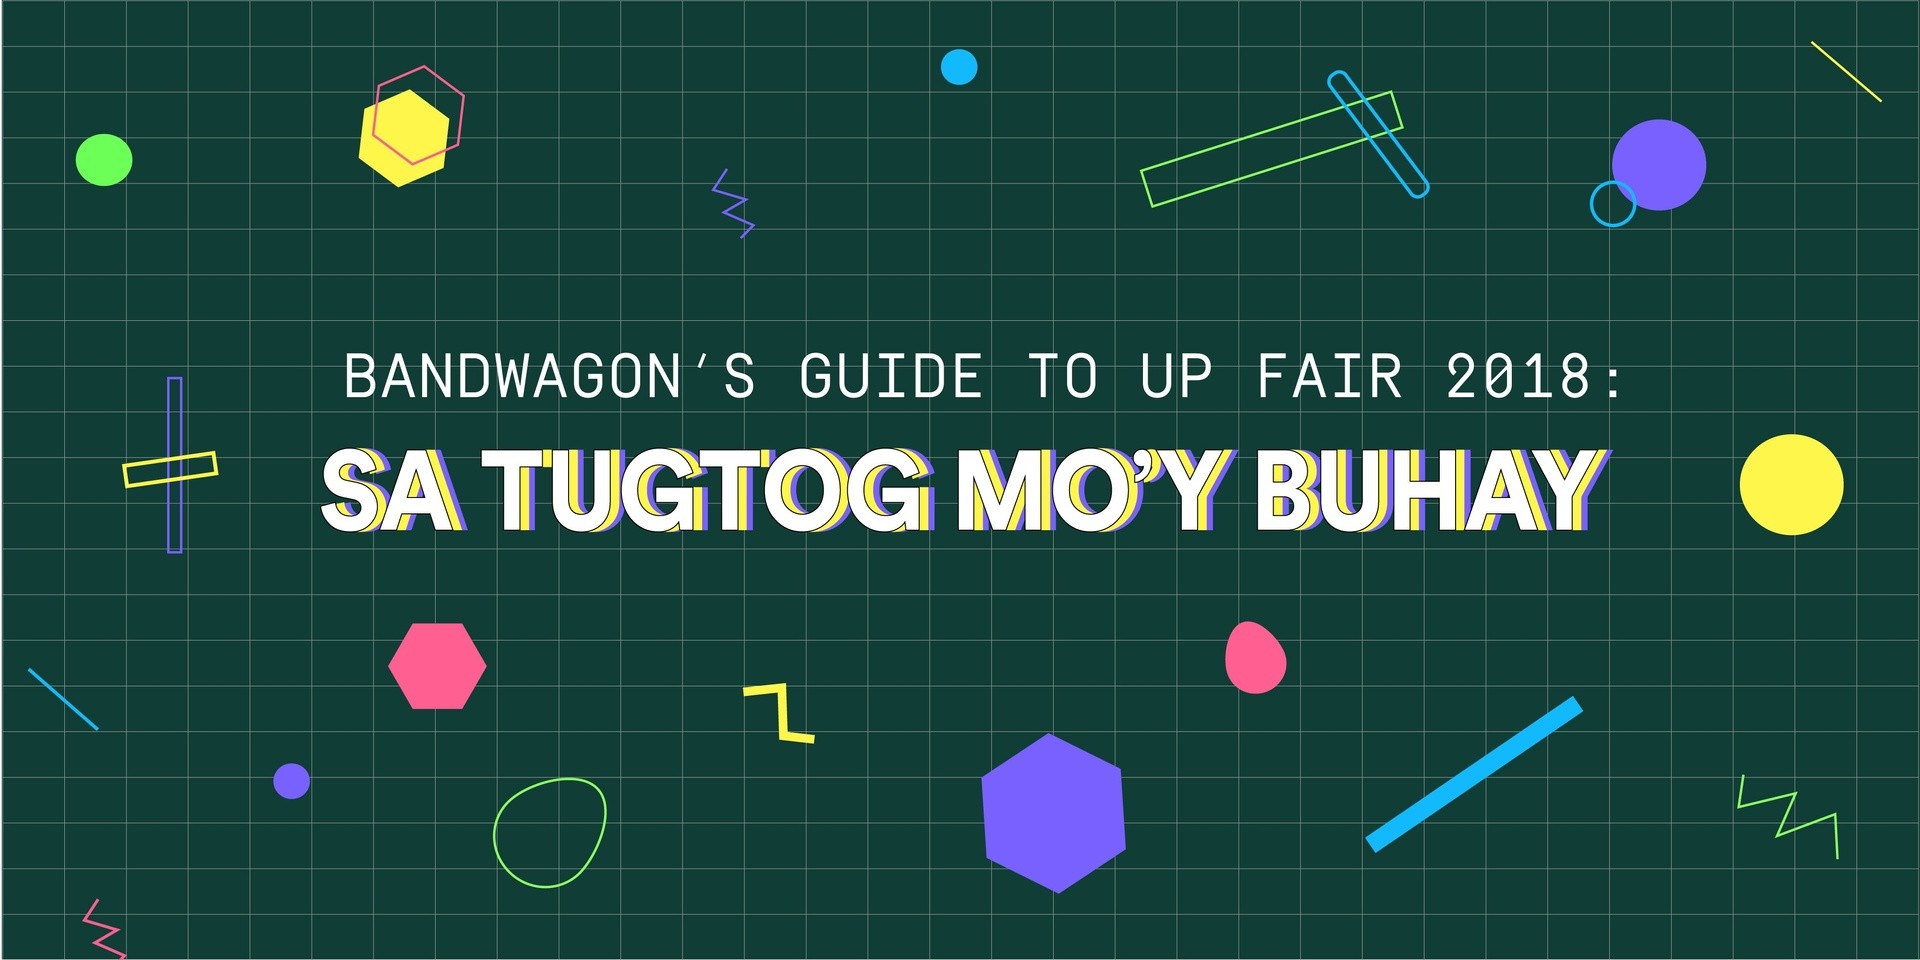 Bandwagon's Guide to UP Fair 2018